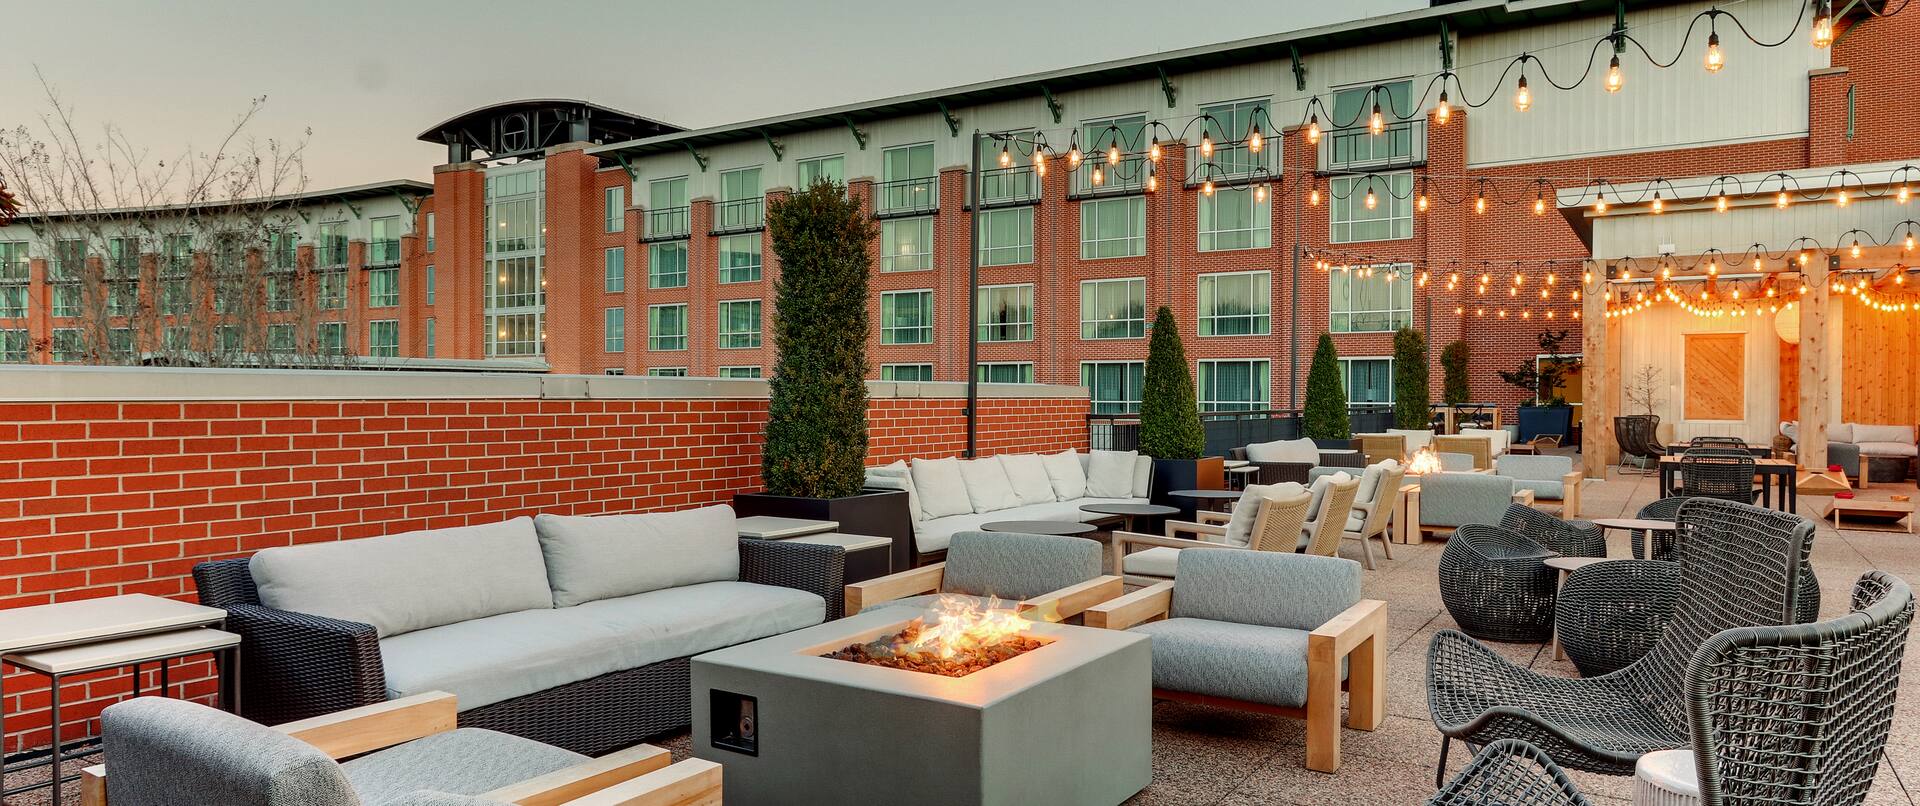 High Rail Rooftop Bar Outdoor Seating And Firepit